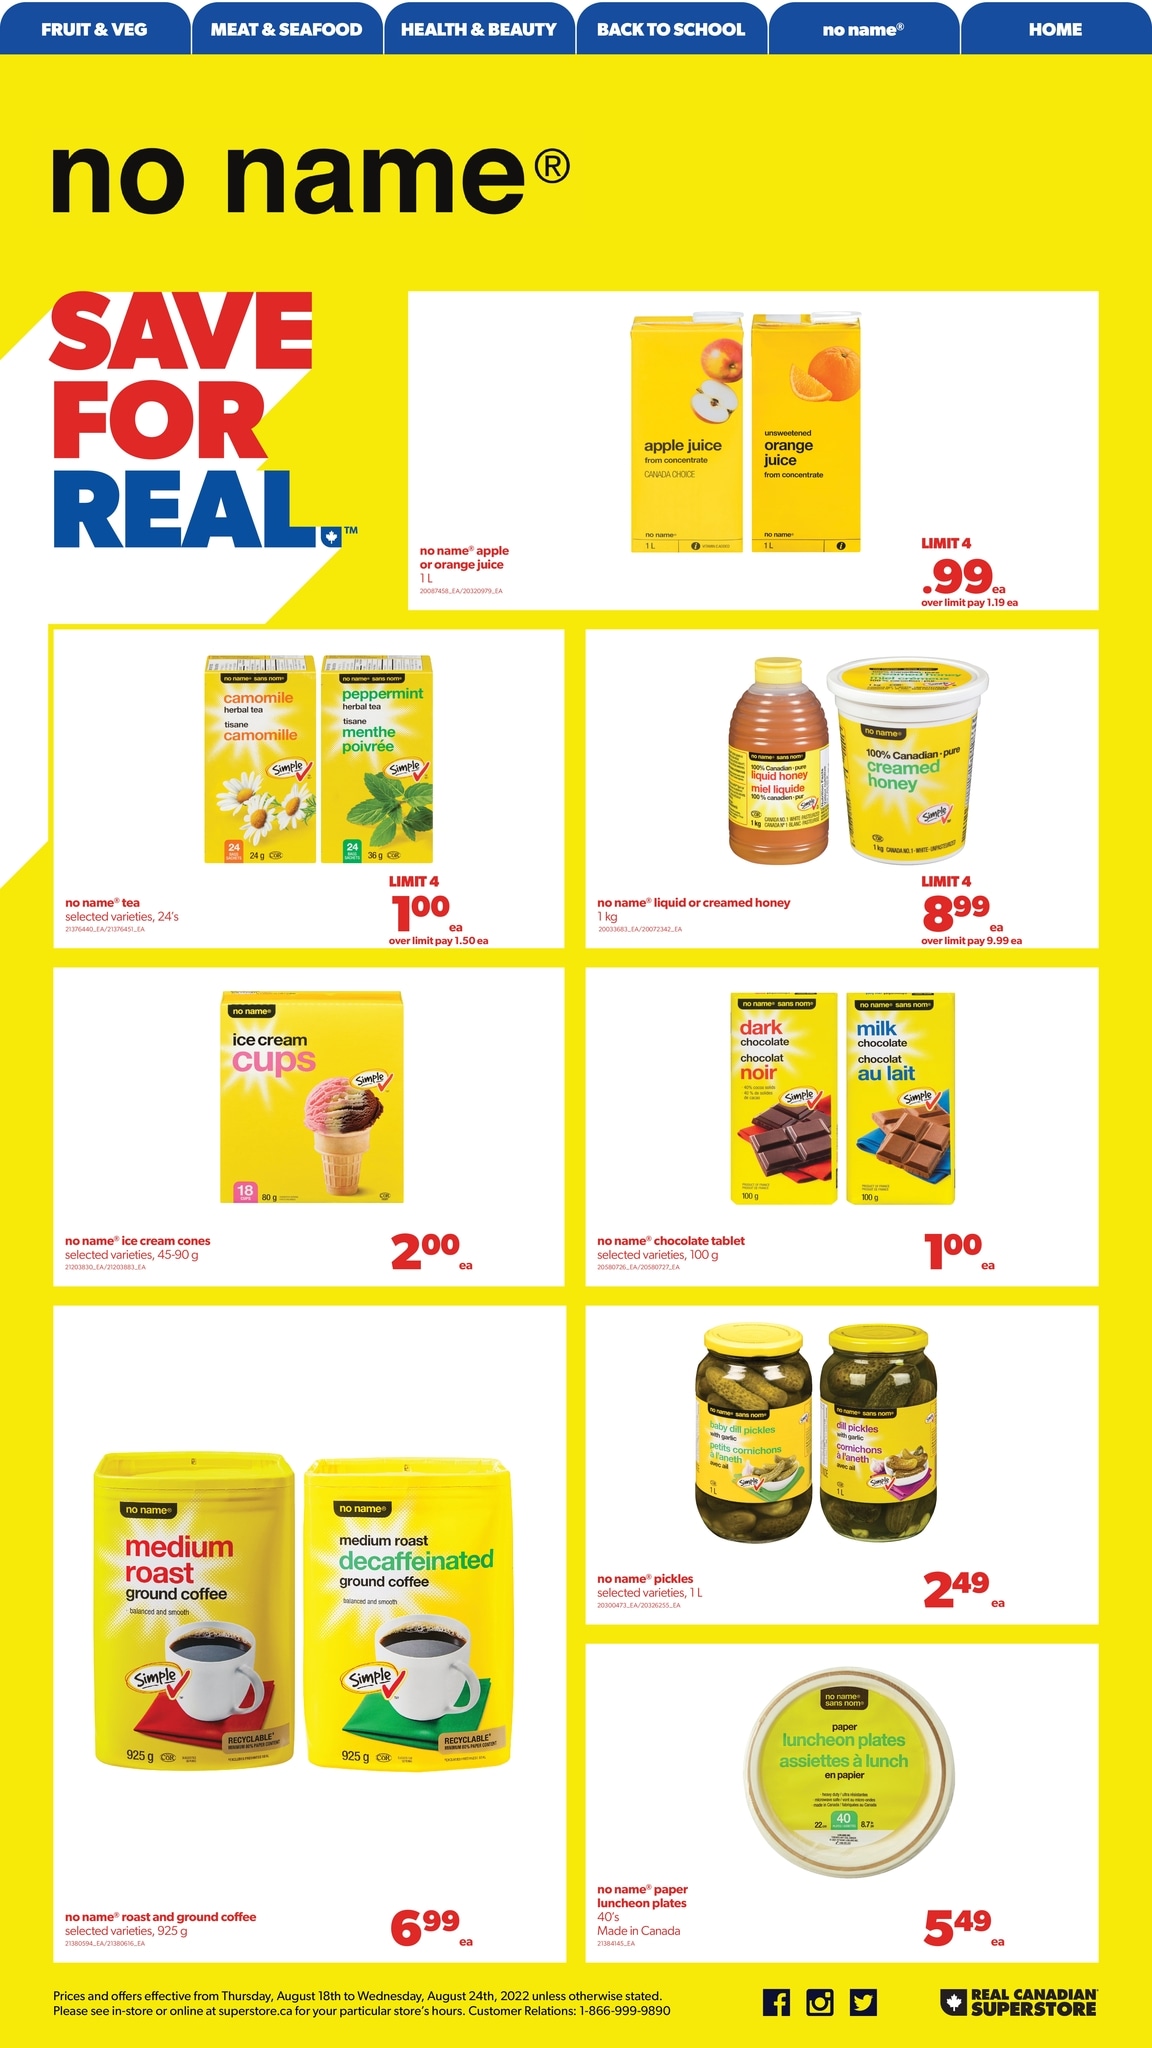 Real Canadian Superstore Western Canada - Weekly Flyer Specials - Page 7